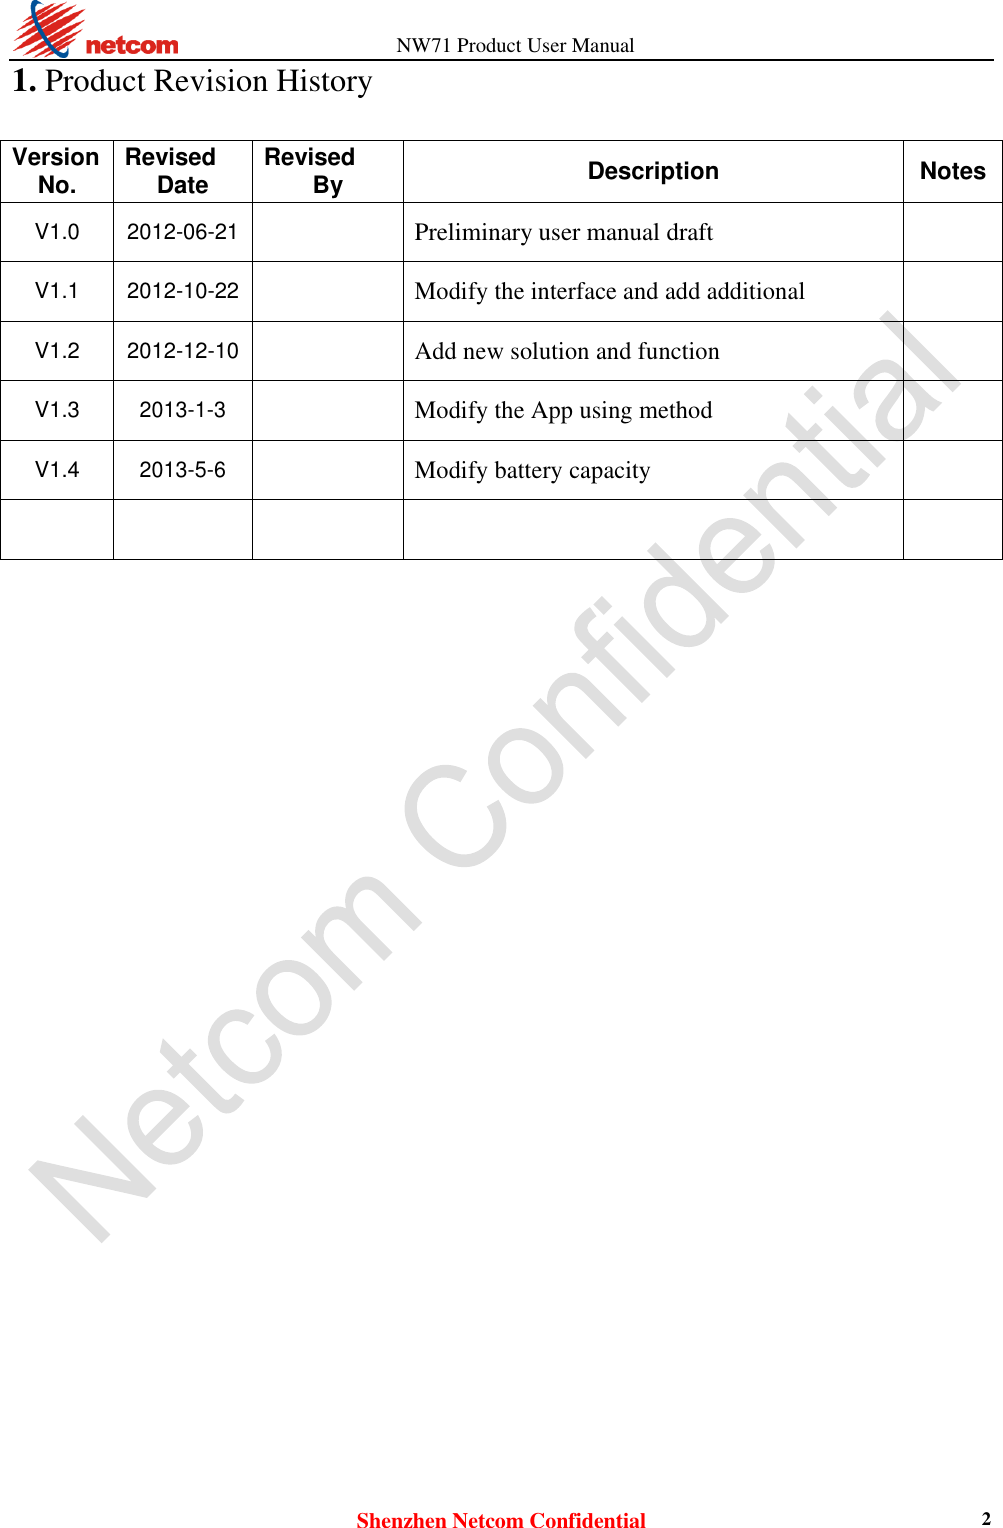                   NW71 Product User Manual Shenzhen Netcom Confidential 2 1. Product Revision History Version No. Revised Date Revised By Description Notes V1.0 2012-06-21  Preliminary user manual draft  V1.1 2012-10-22  Modify the interface and add additional  V1.2 2012-12-10  Add new solution and function  V1.3 2013-1-3  Modify the App using method  V1.4 2013-5-6  Modify battery capacity                                    